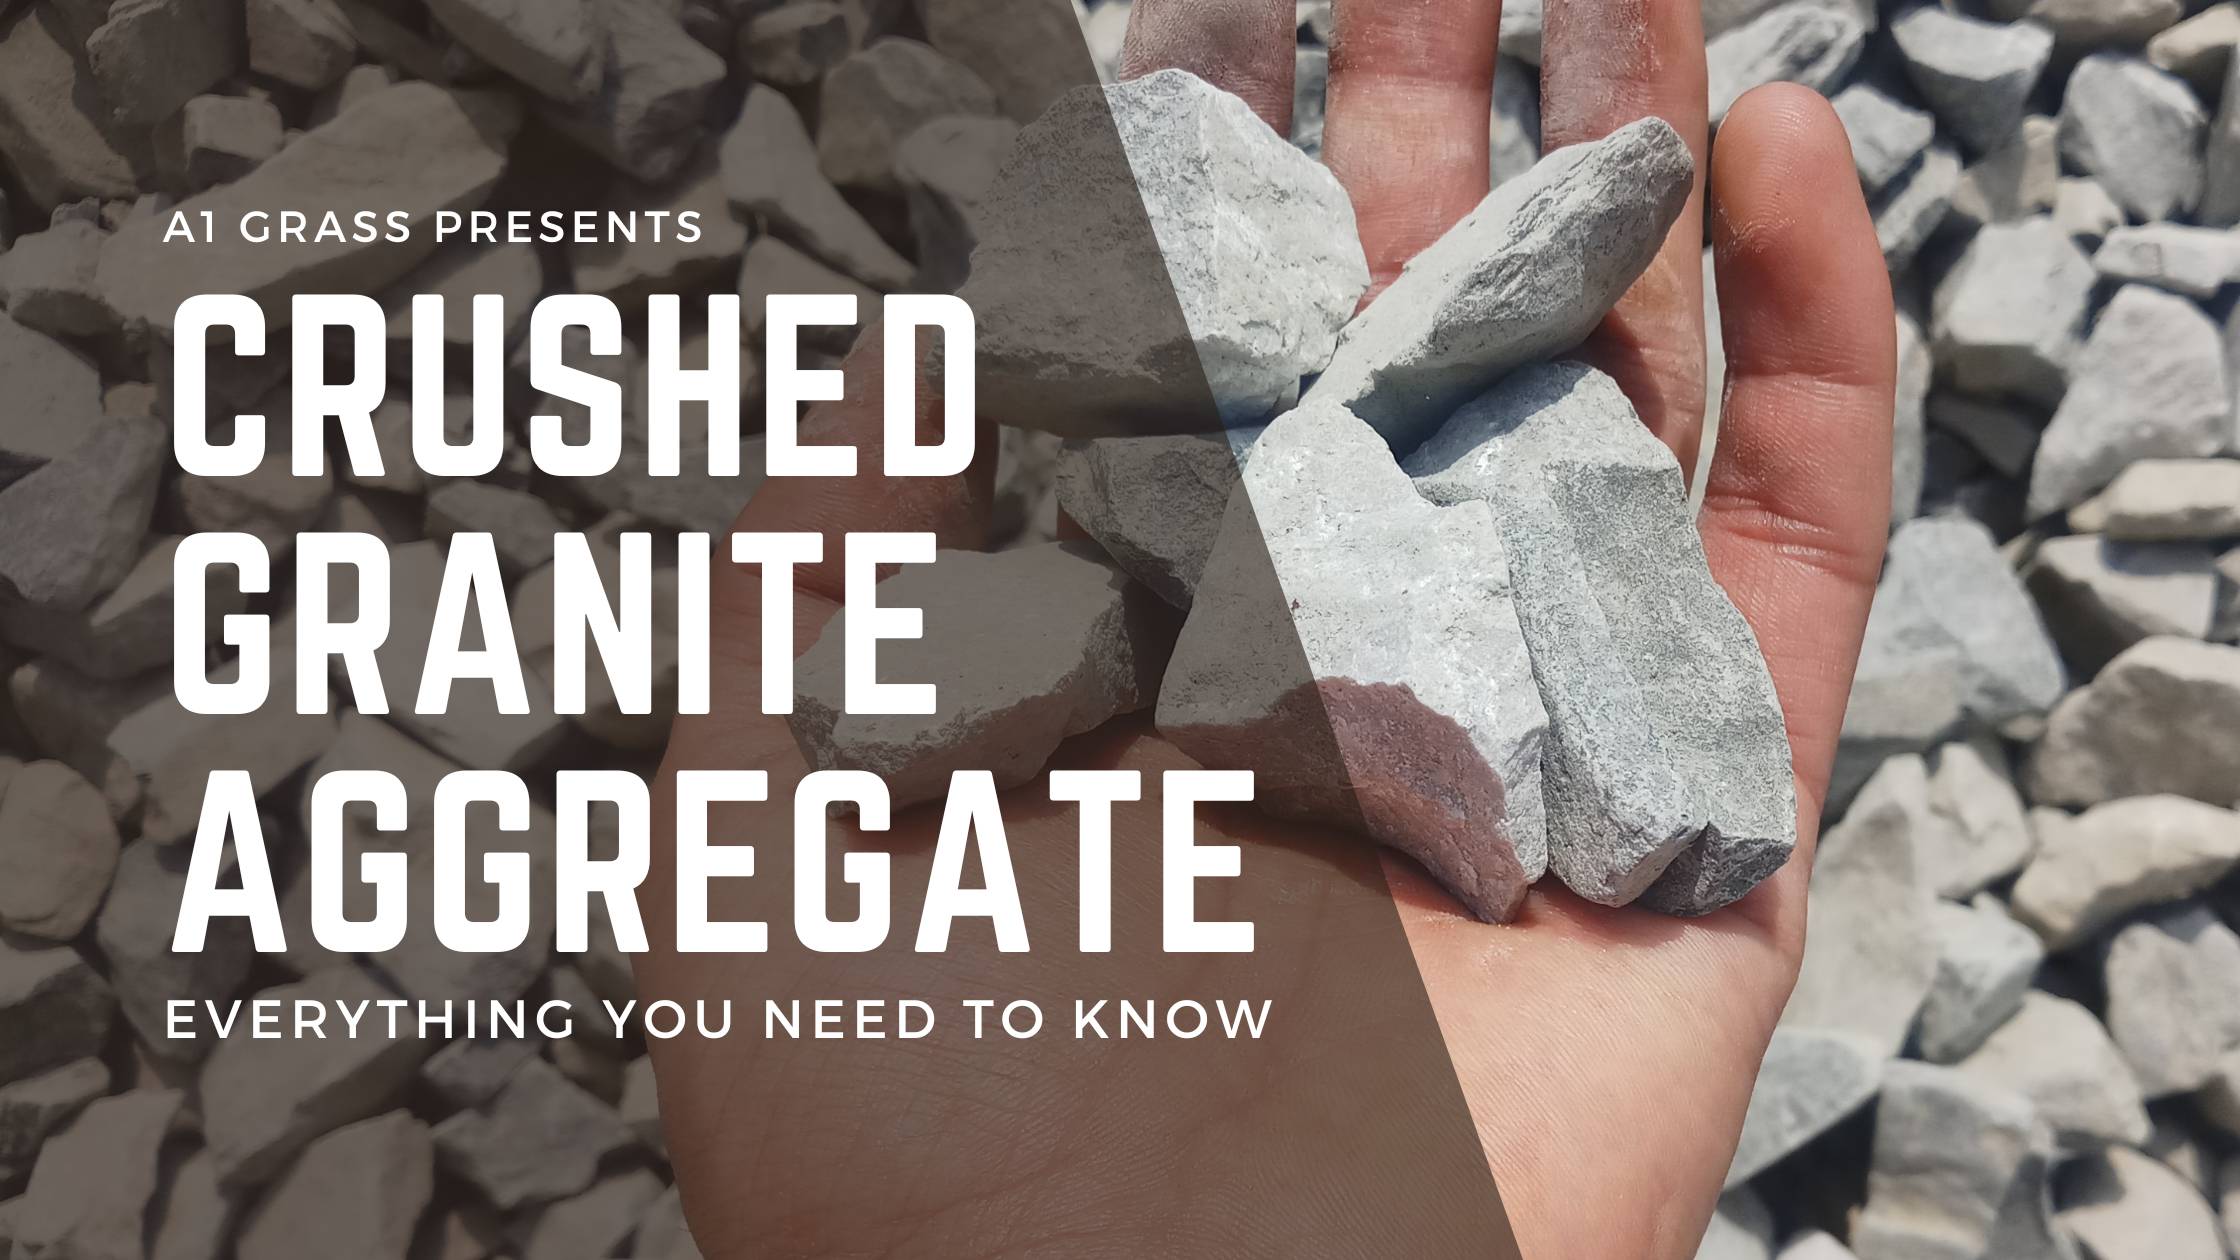 Crushed Granite Aggregate and everything you need to know